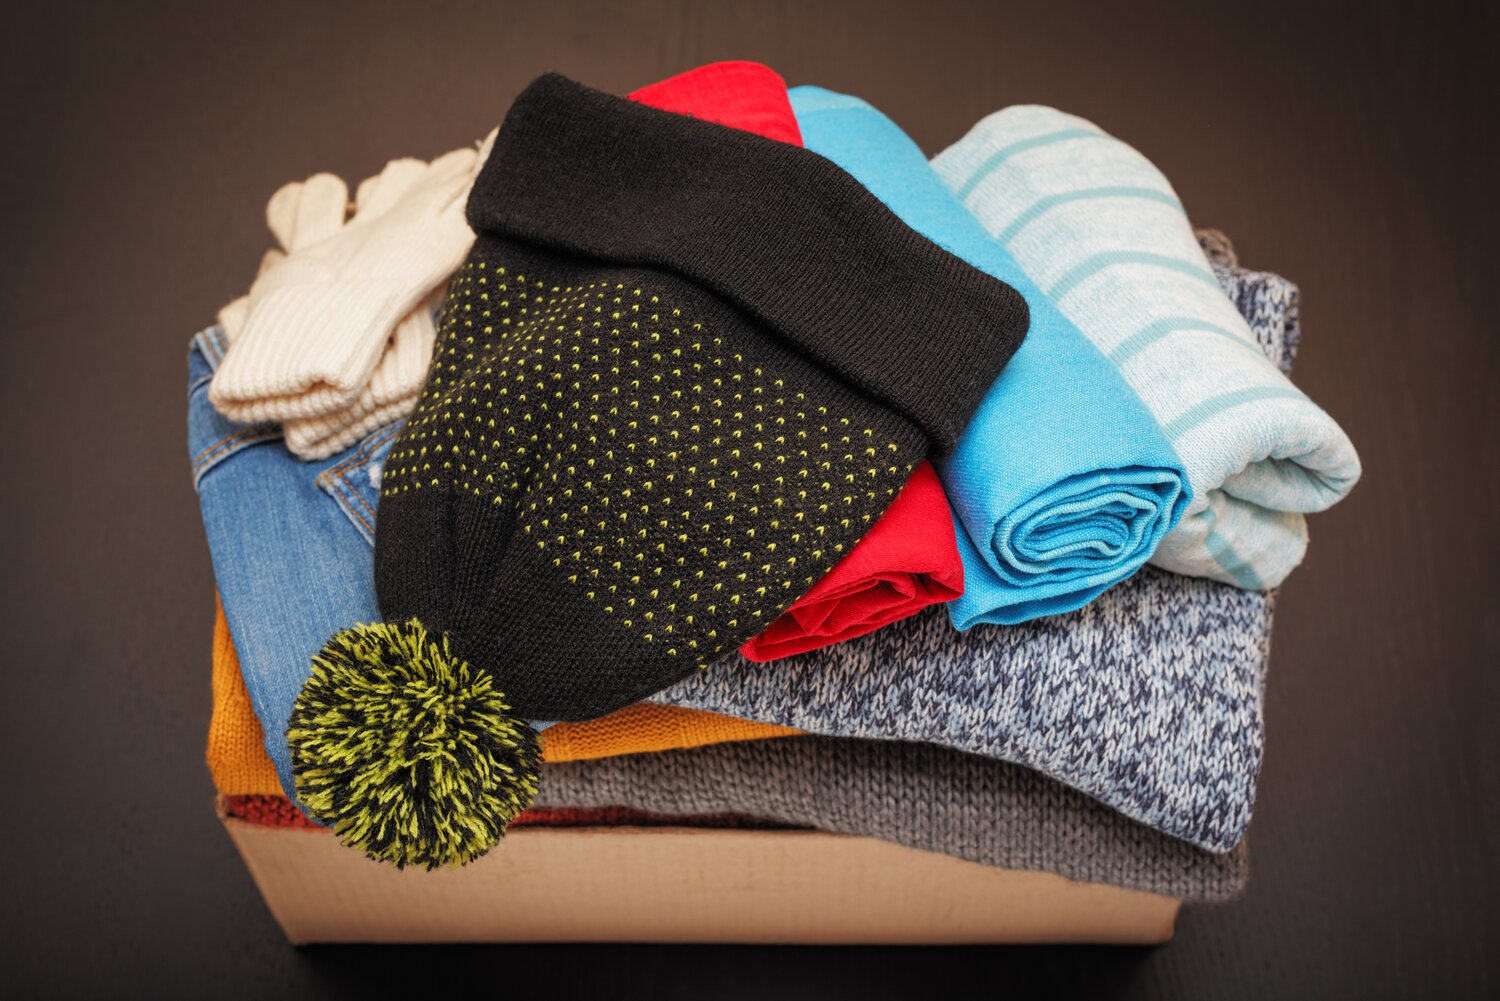 The Warm Hearts Winter Drive accepts both cash donations and new winter clothes.  